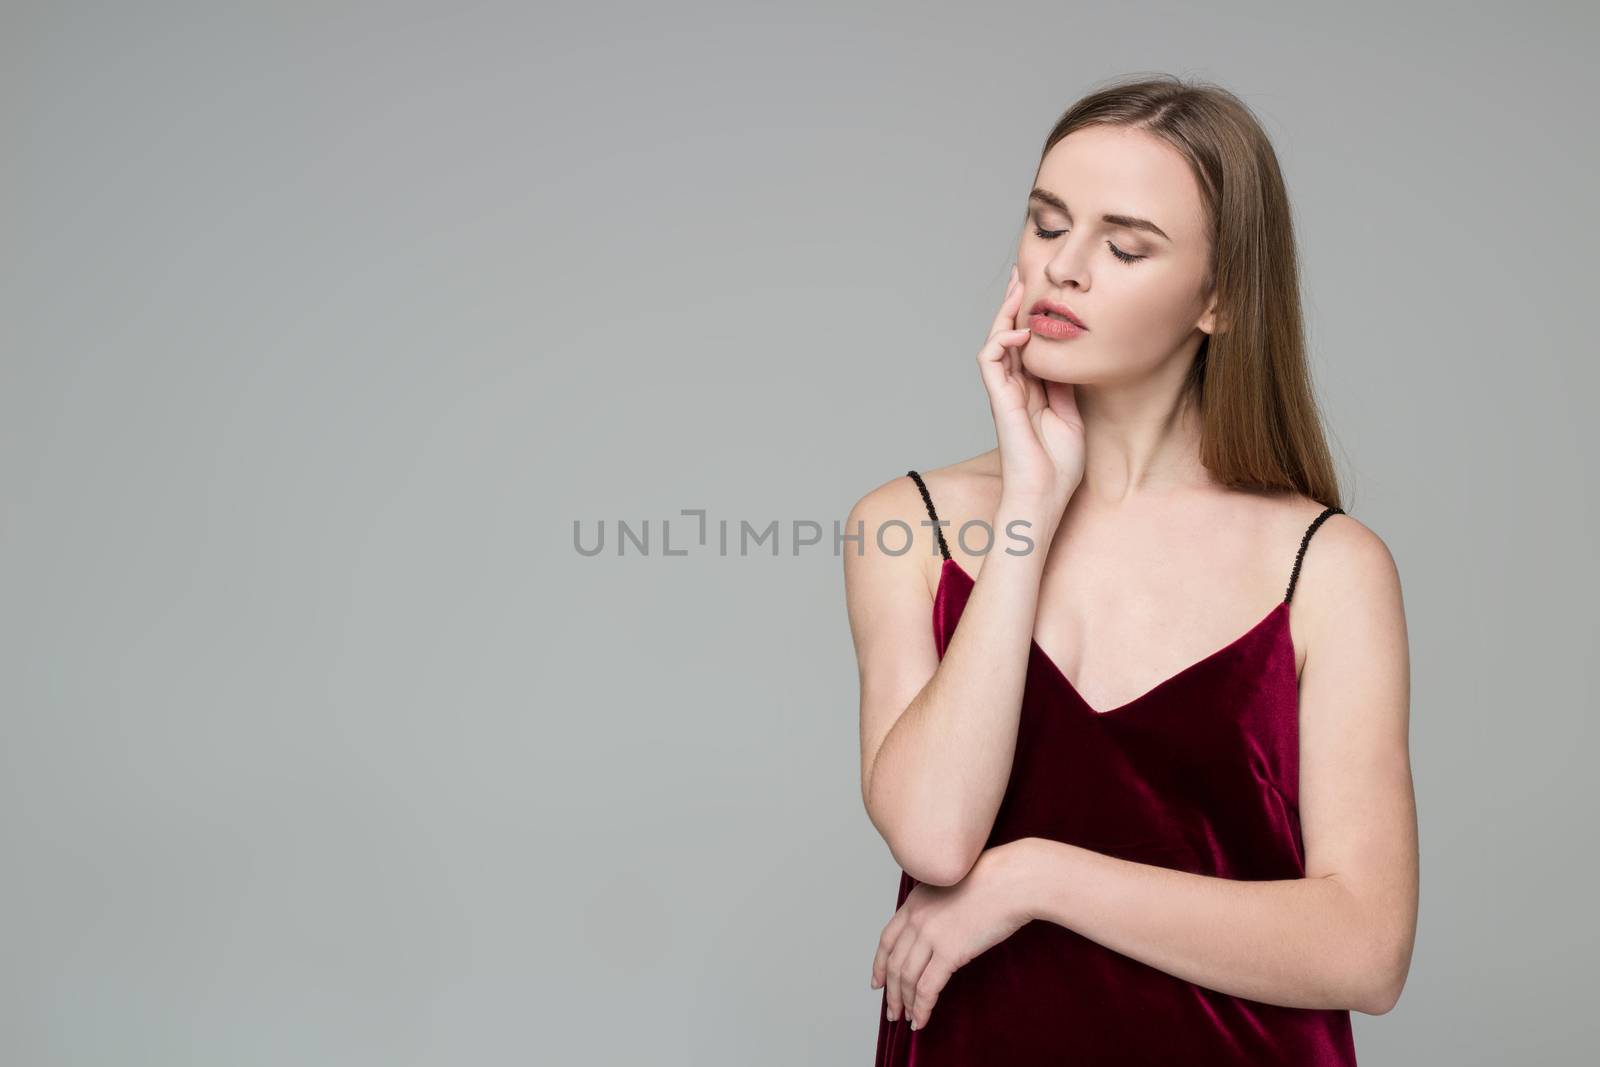 Blond girl in dark red poses showing emotions: wistfulness, drea by VeraVerano